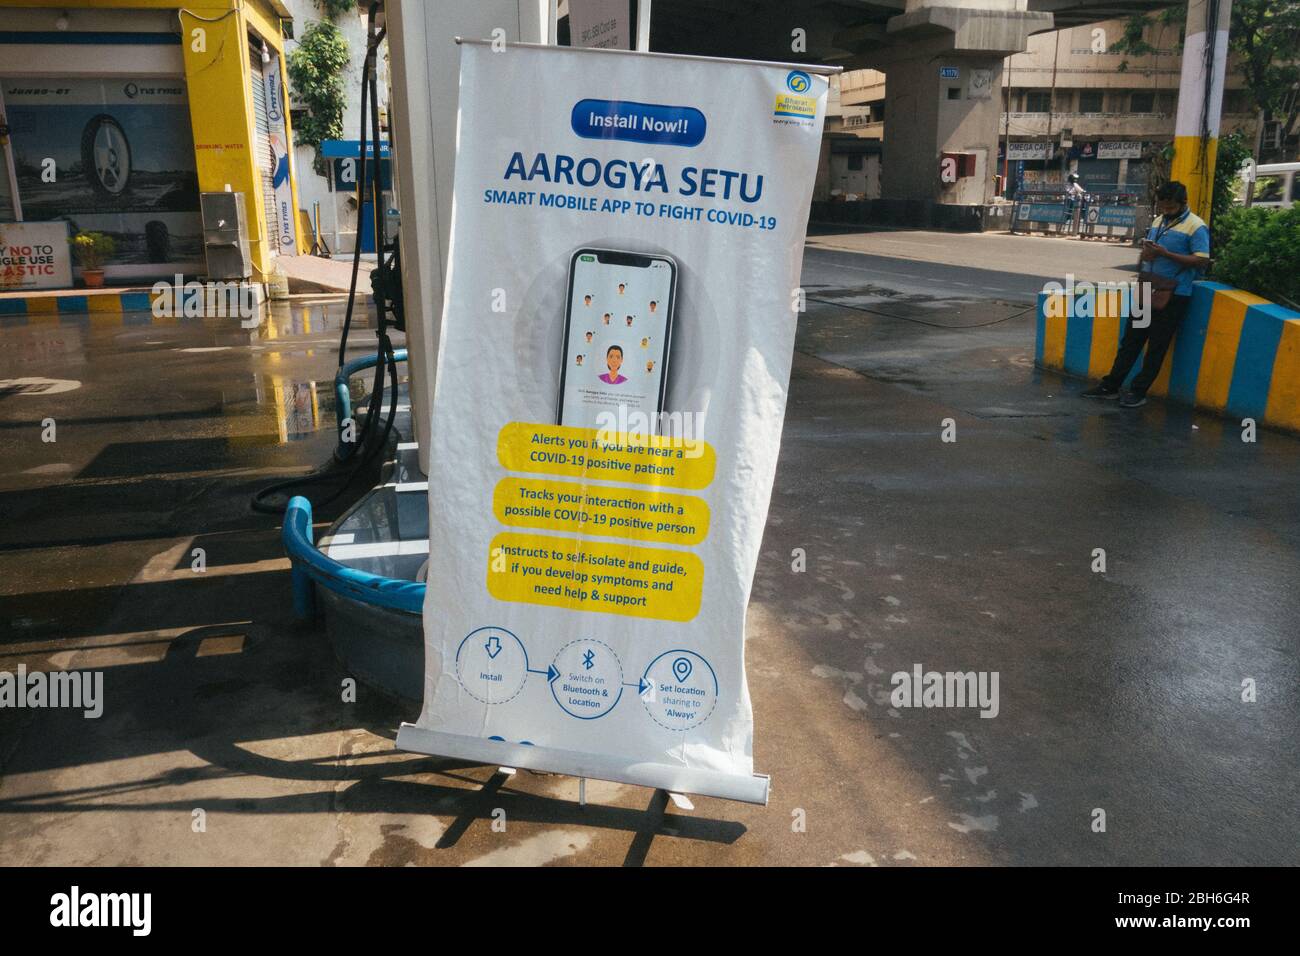 Hyderabad, India. 24th April, 2020.A banner of Aarogya setu stands at a gas station during covid 19 pandemic lockdown in Hyderabad,India.Aarogya Setu is a mobile application developed by the Government of India to connect essential health services with the people of India to fight against COVID-19.. Credit:Sanjay Borra/Alamy News Stock Photo